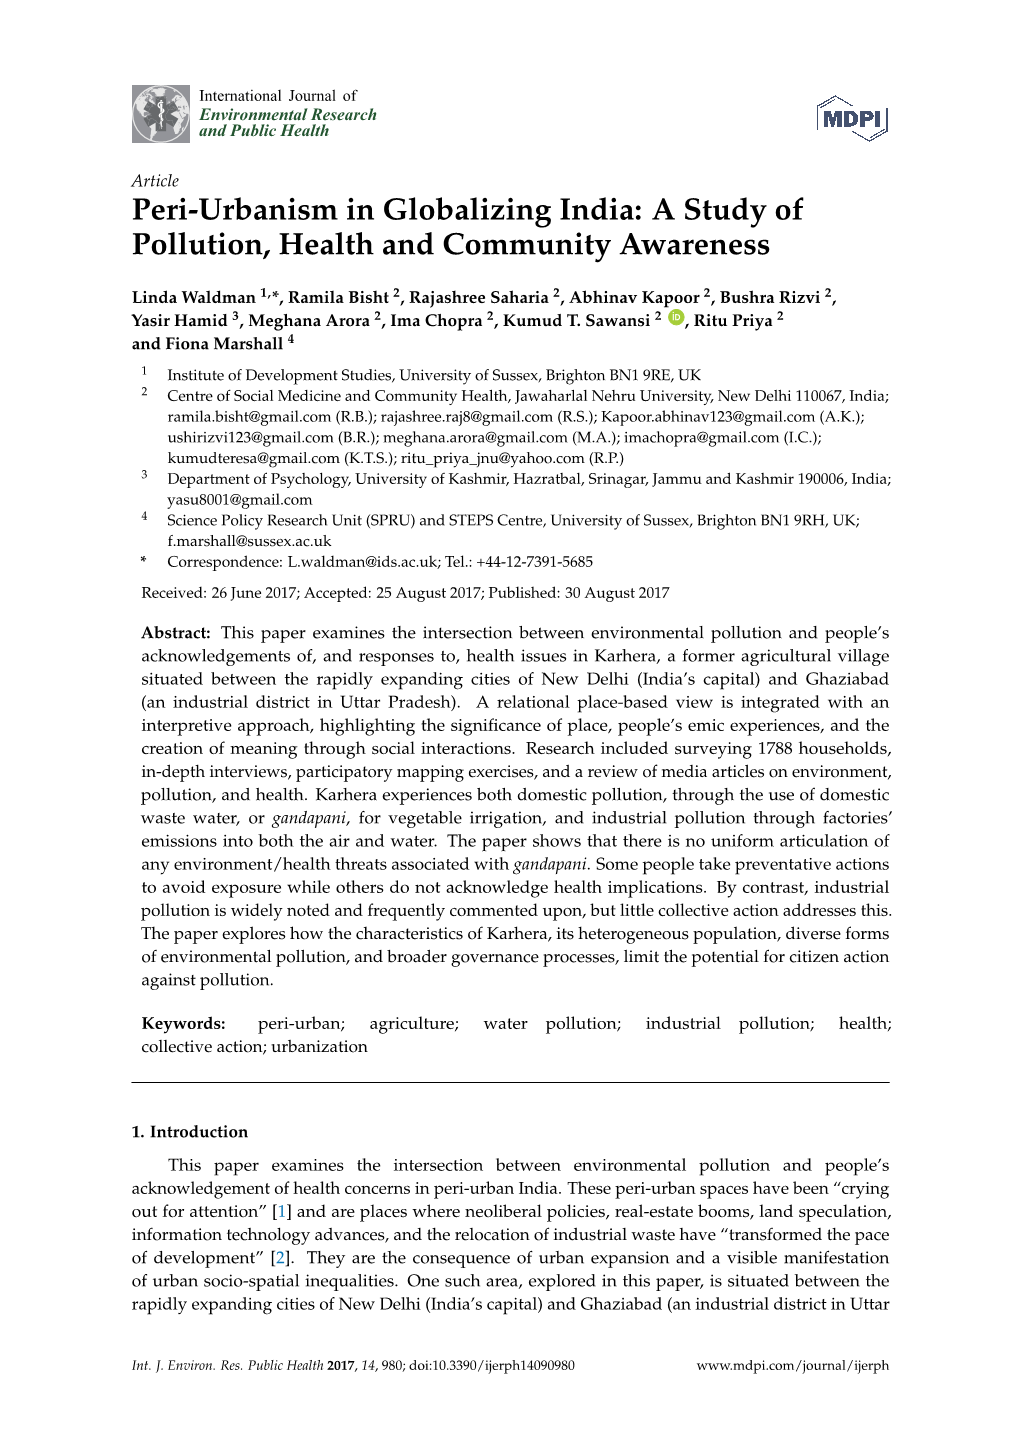 Peri-Urbanism in Globalizing India: a Study of Pollution, Health and Community Awareness